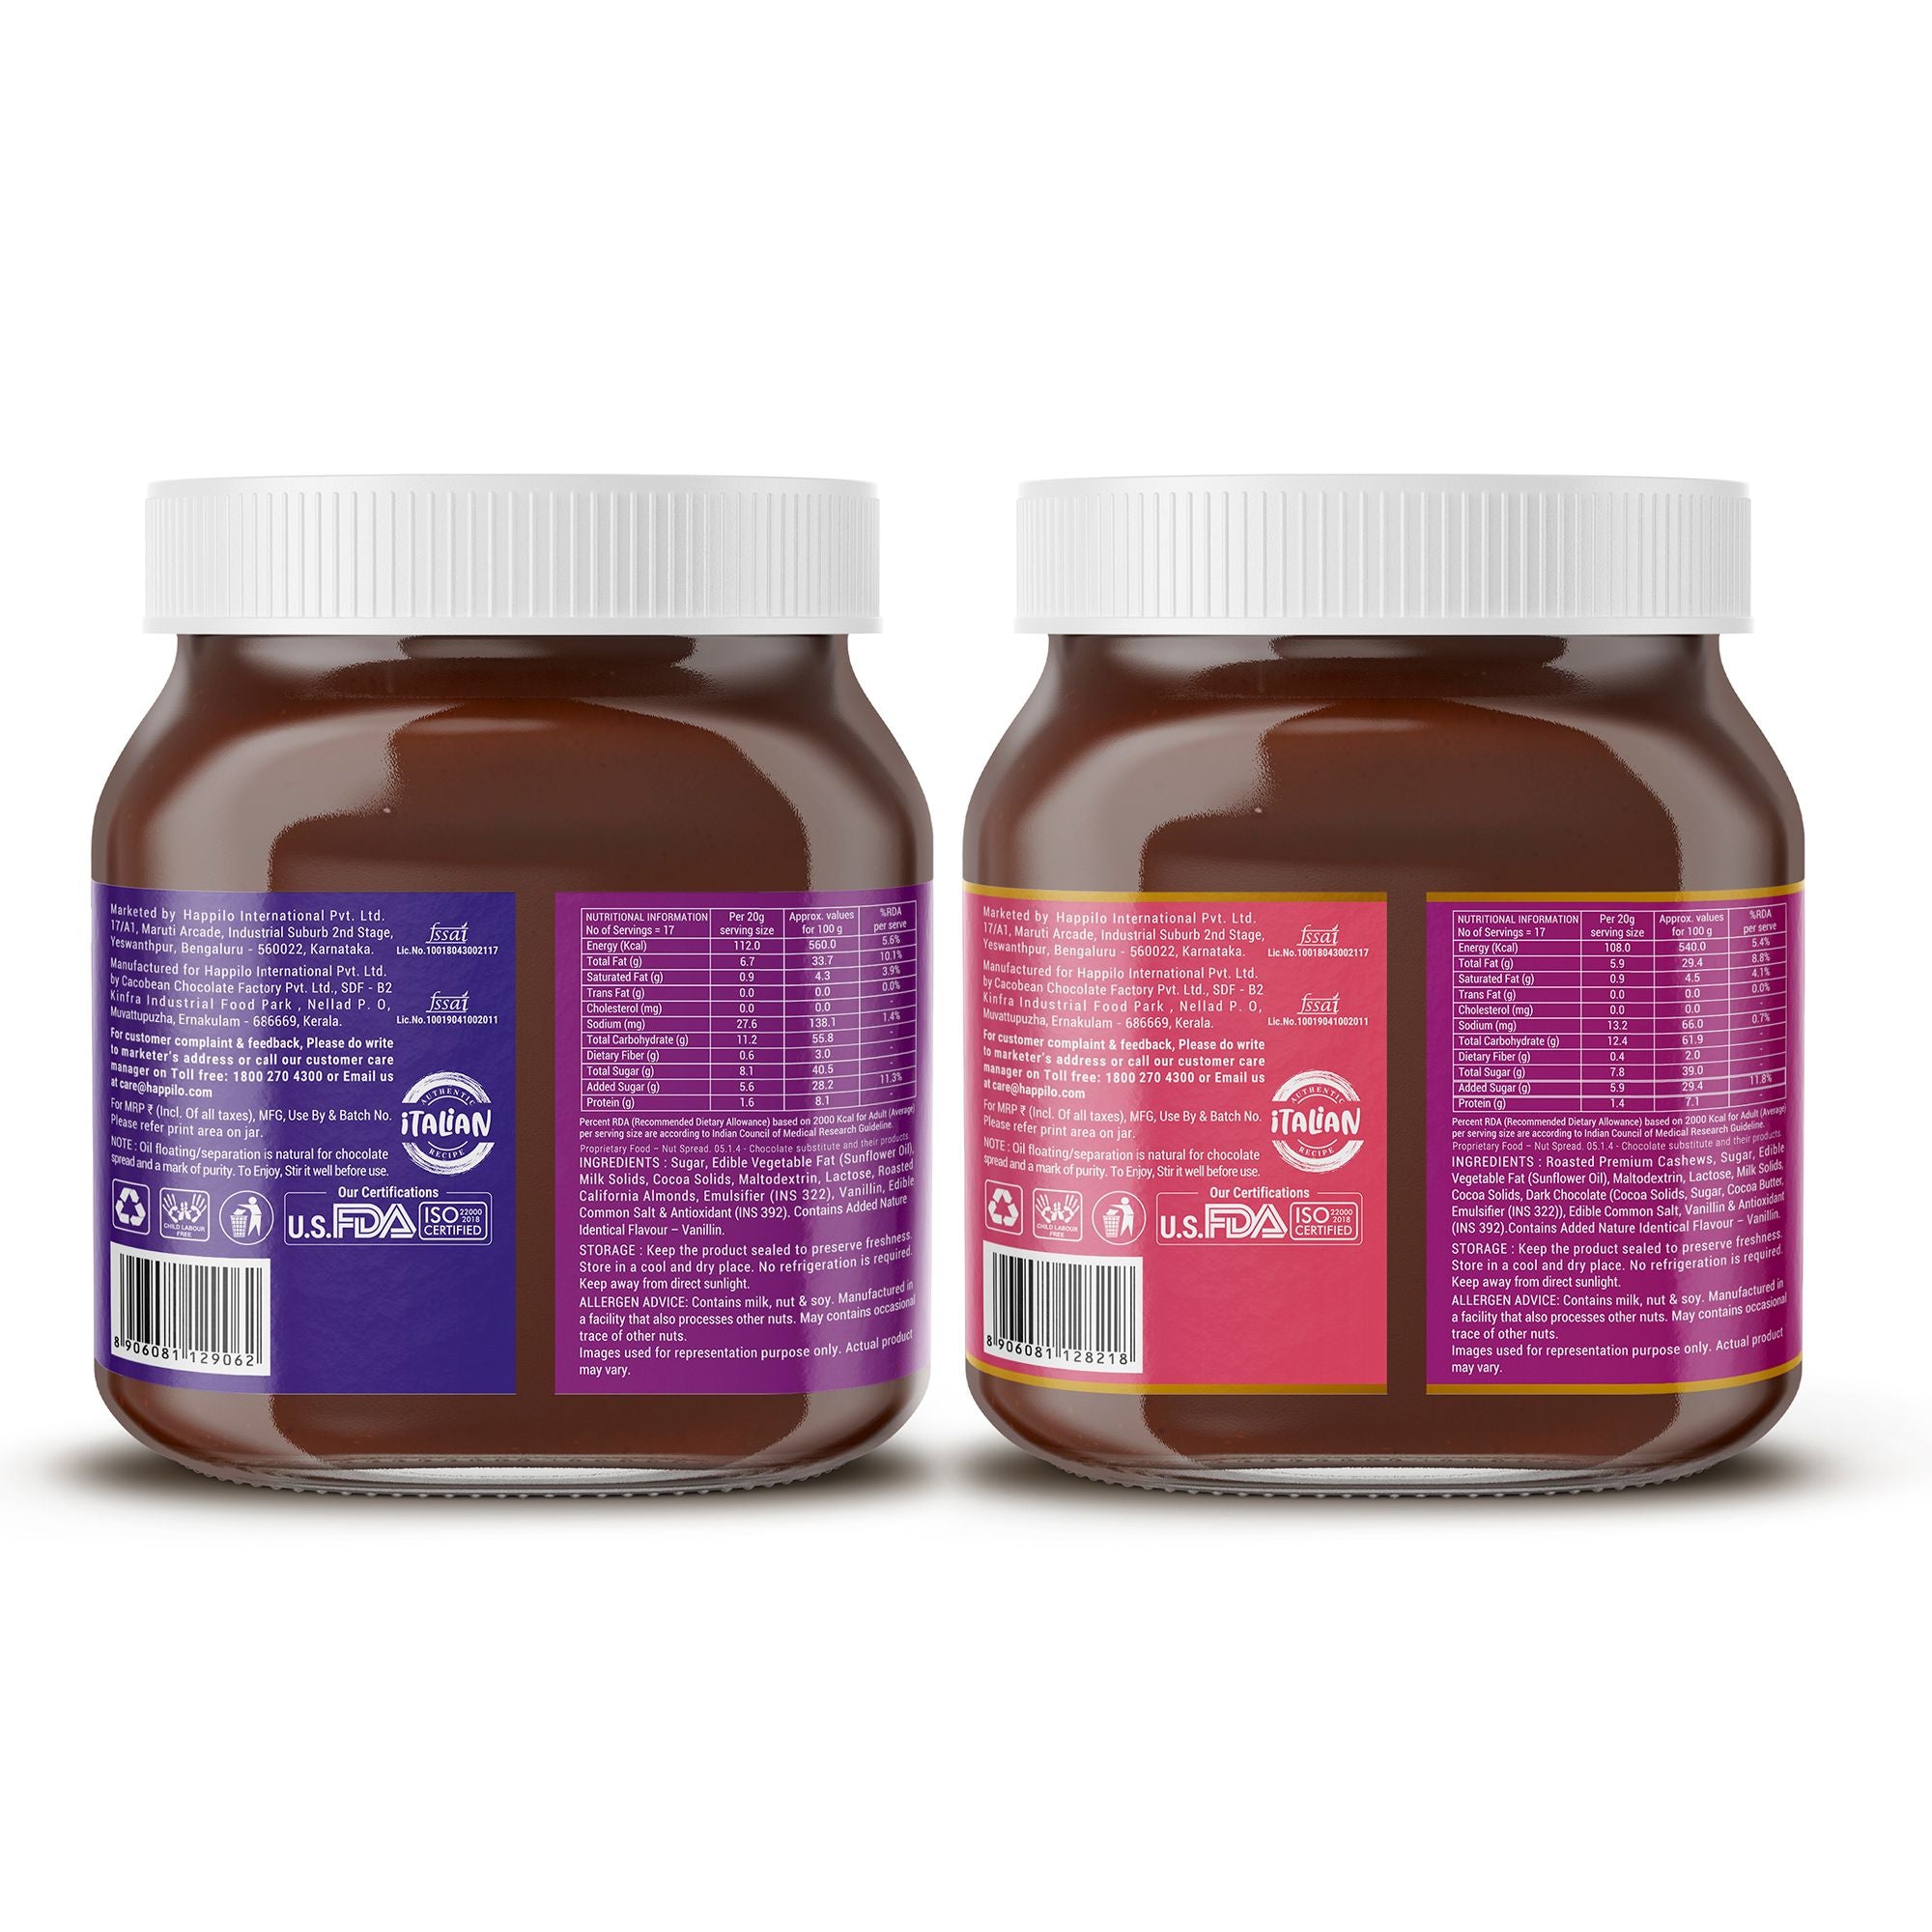 Premium Almond and Cashew Spread Combo 700g (350g Each)